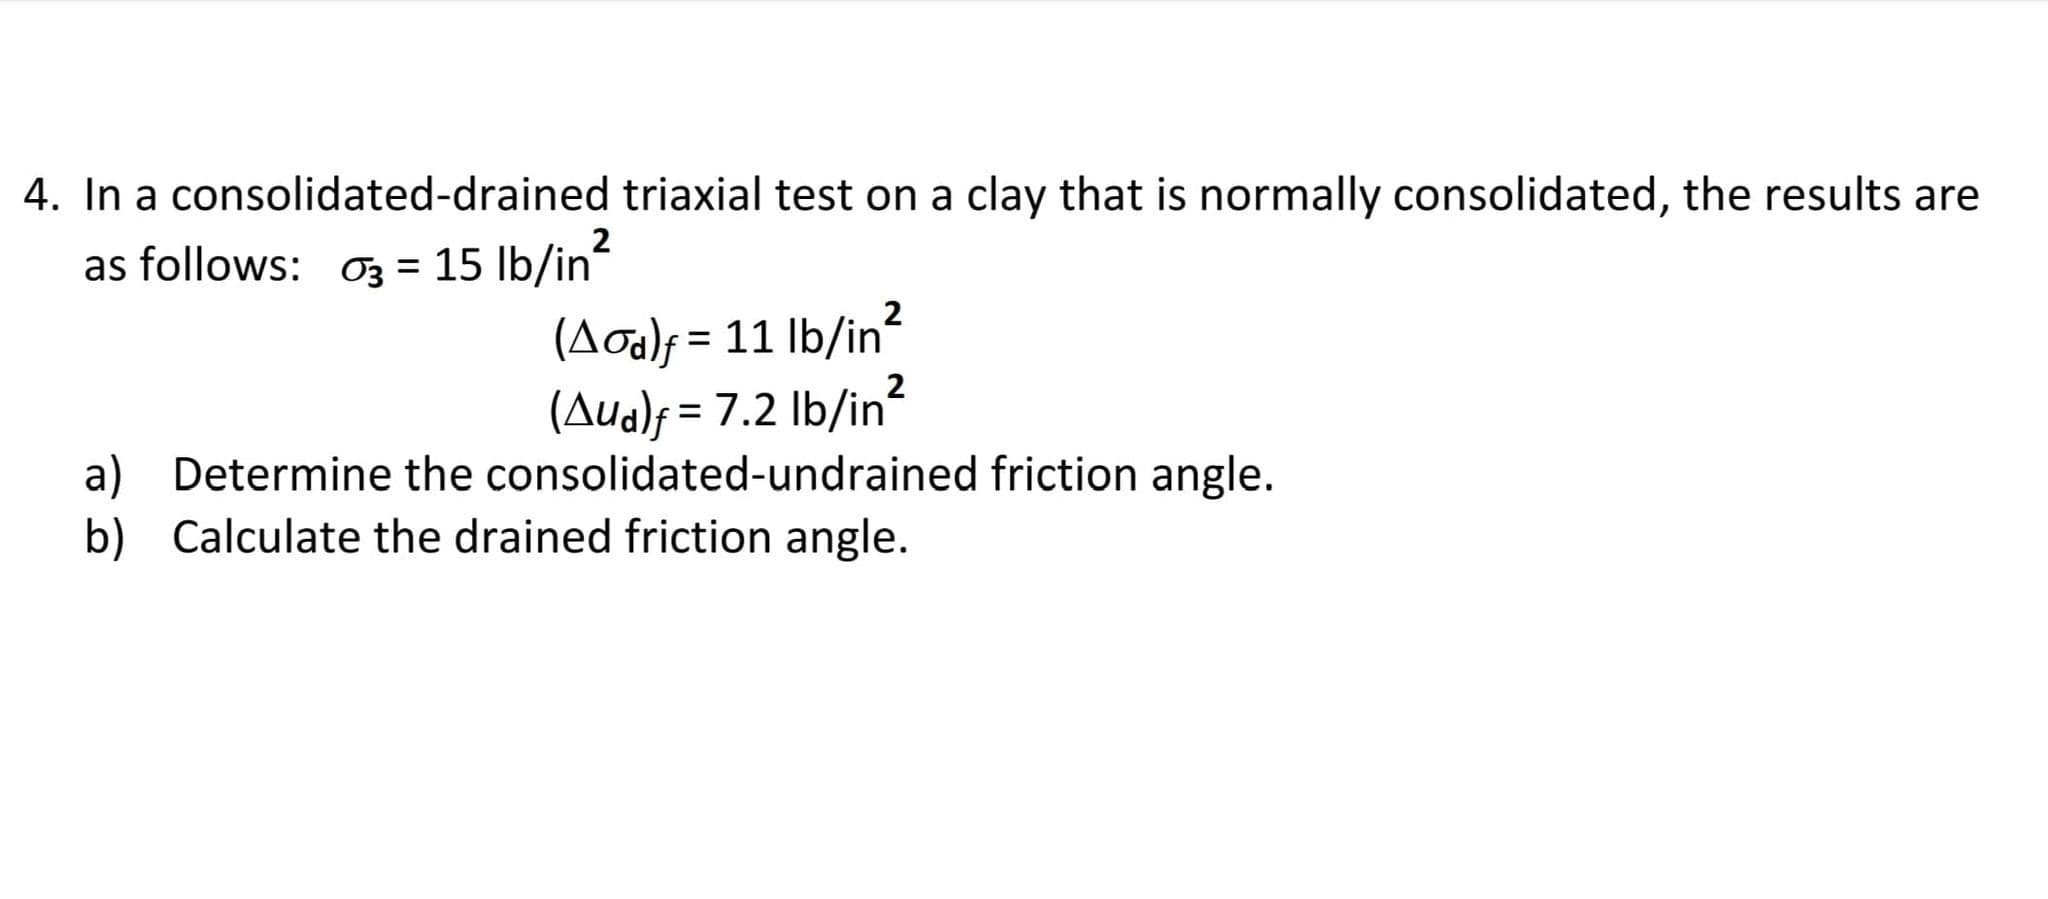 4. In a consolidated-drained triaxial test on a clay that is normally consolidated, the results are
as follows: O3 = 15 lb/in
2
(Aoa)f = 11 lb/in?
(Aua)f = 7.2 lb/in?
a) Determine the consolidated-undrained friction angle.
%3D
b) Calculate the drained friction angle.
